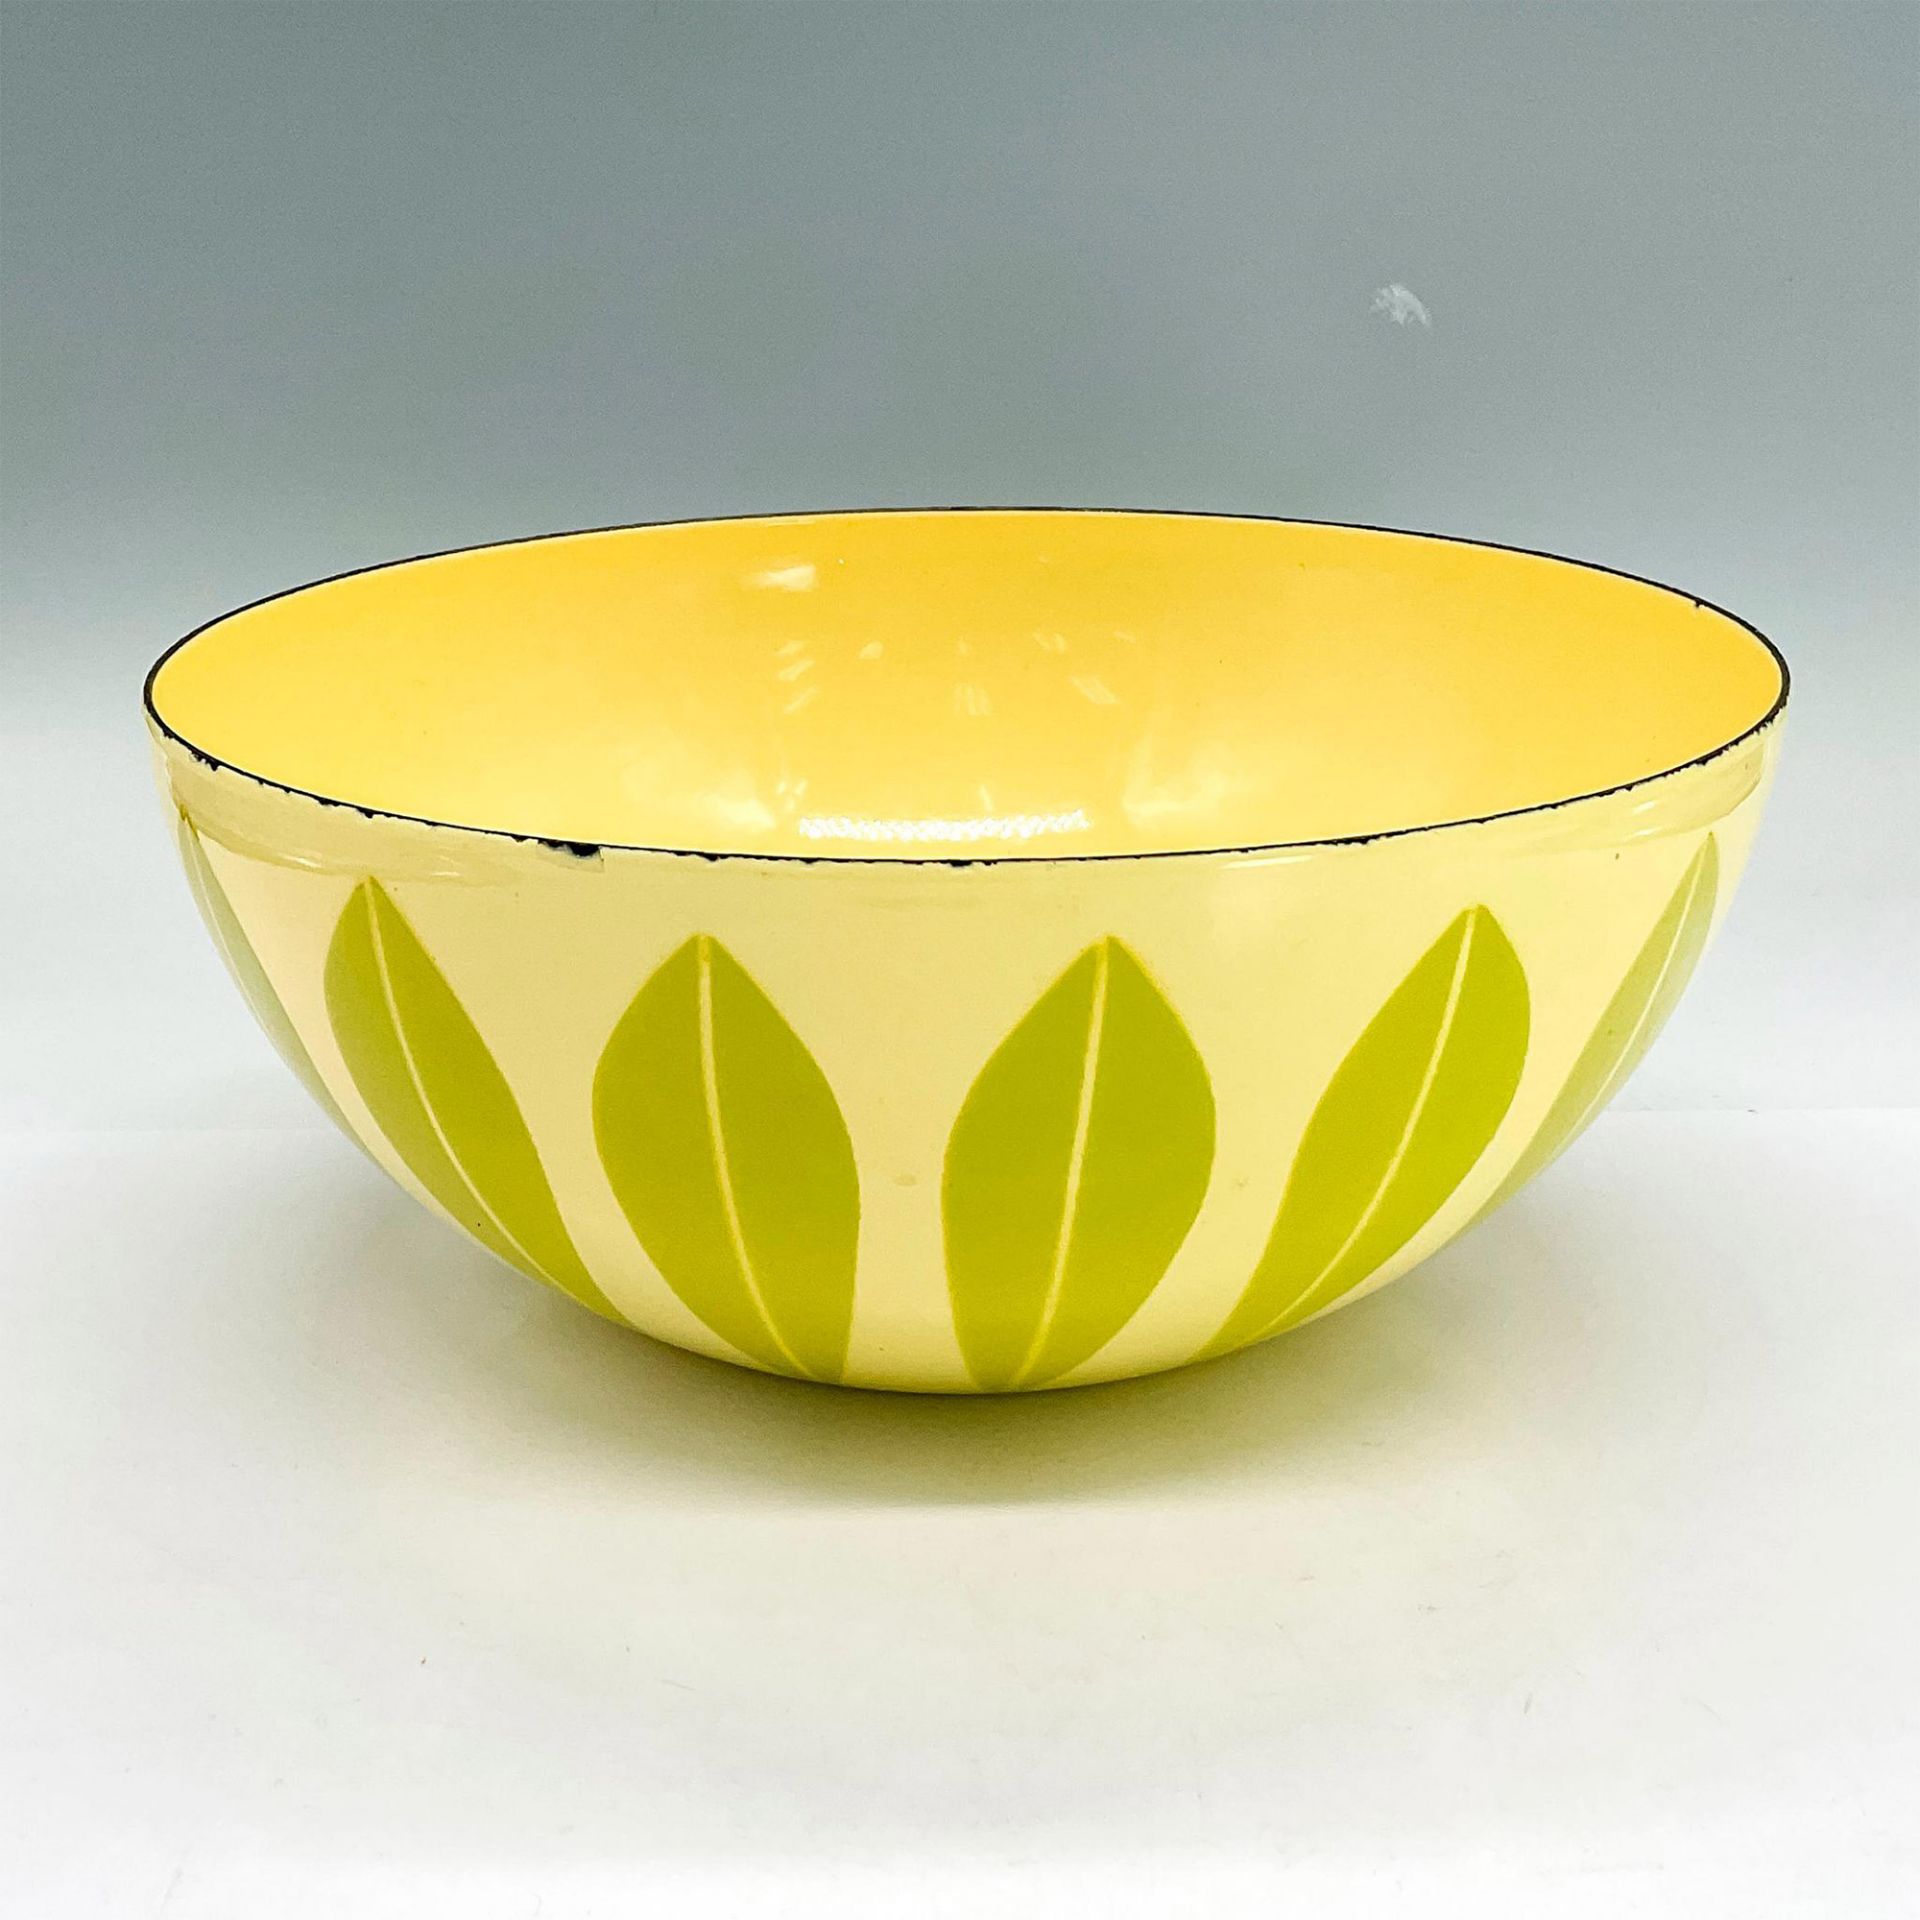 Cathrineholm Enamelware Bowl, Green Leaves on Yellow - Image 2 of 3